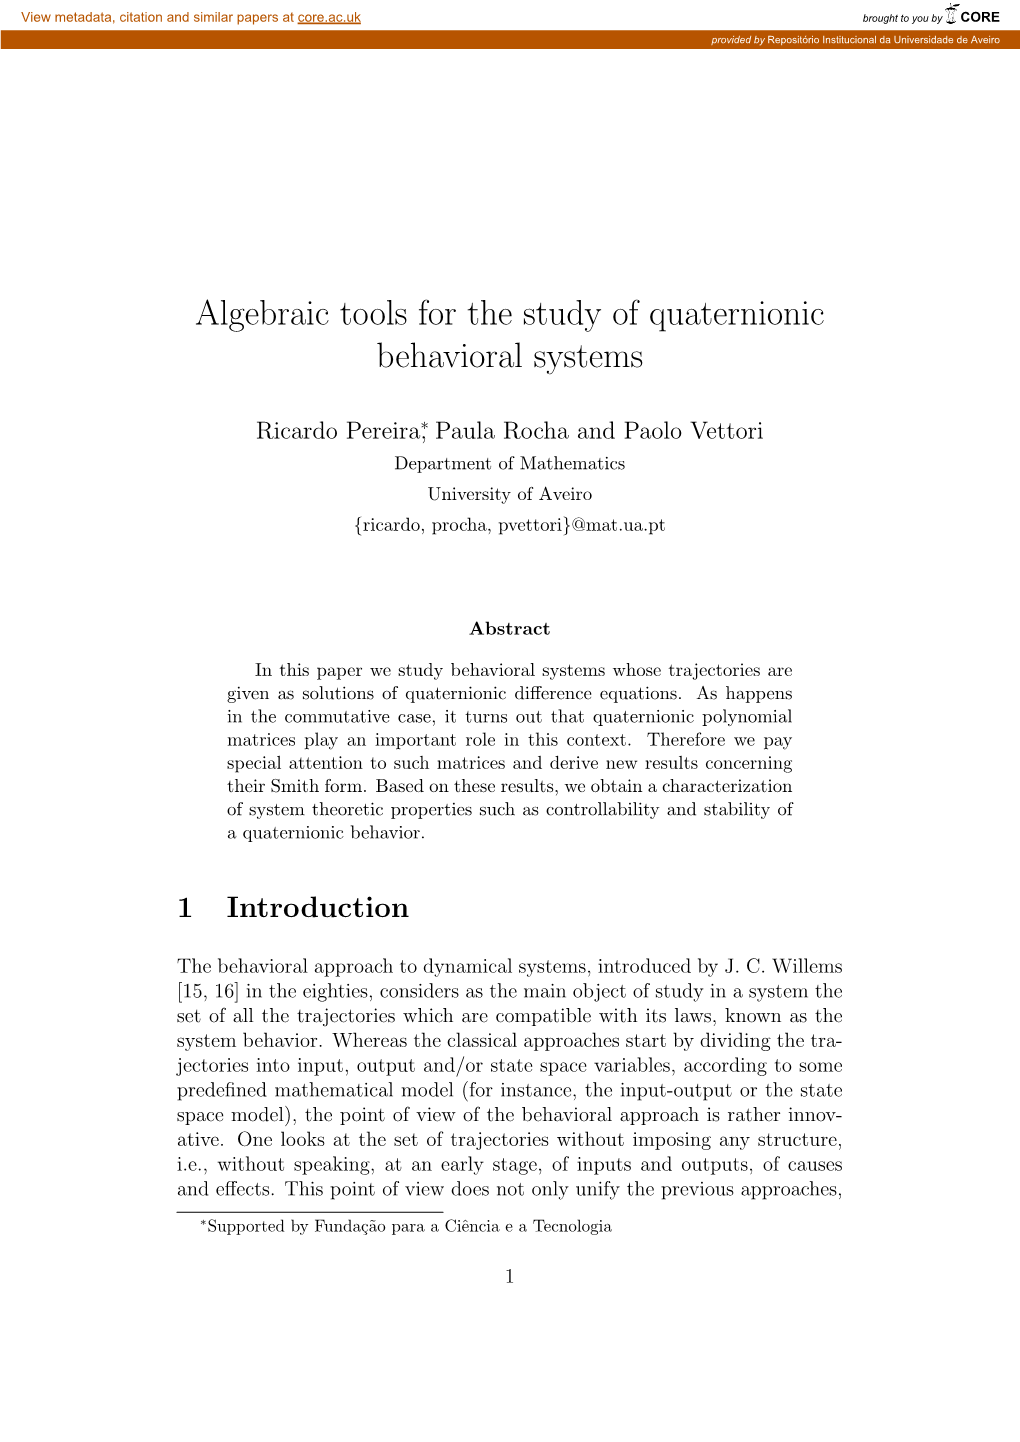 Algebraic Tools for the Study of Quaternionic Behavioral Systems